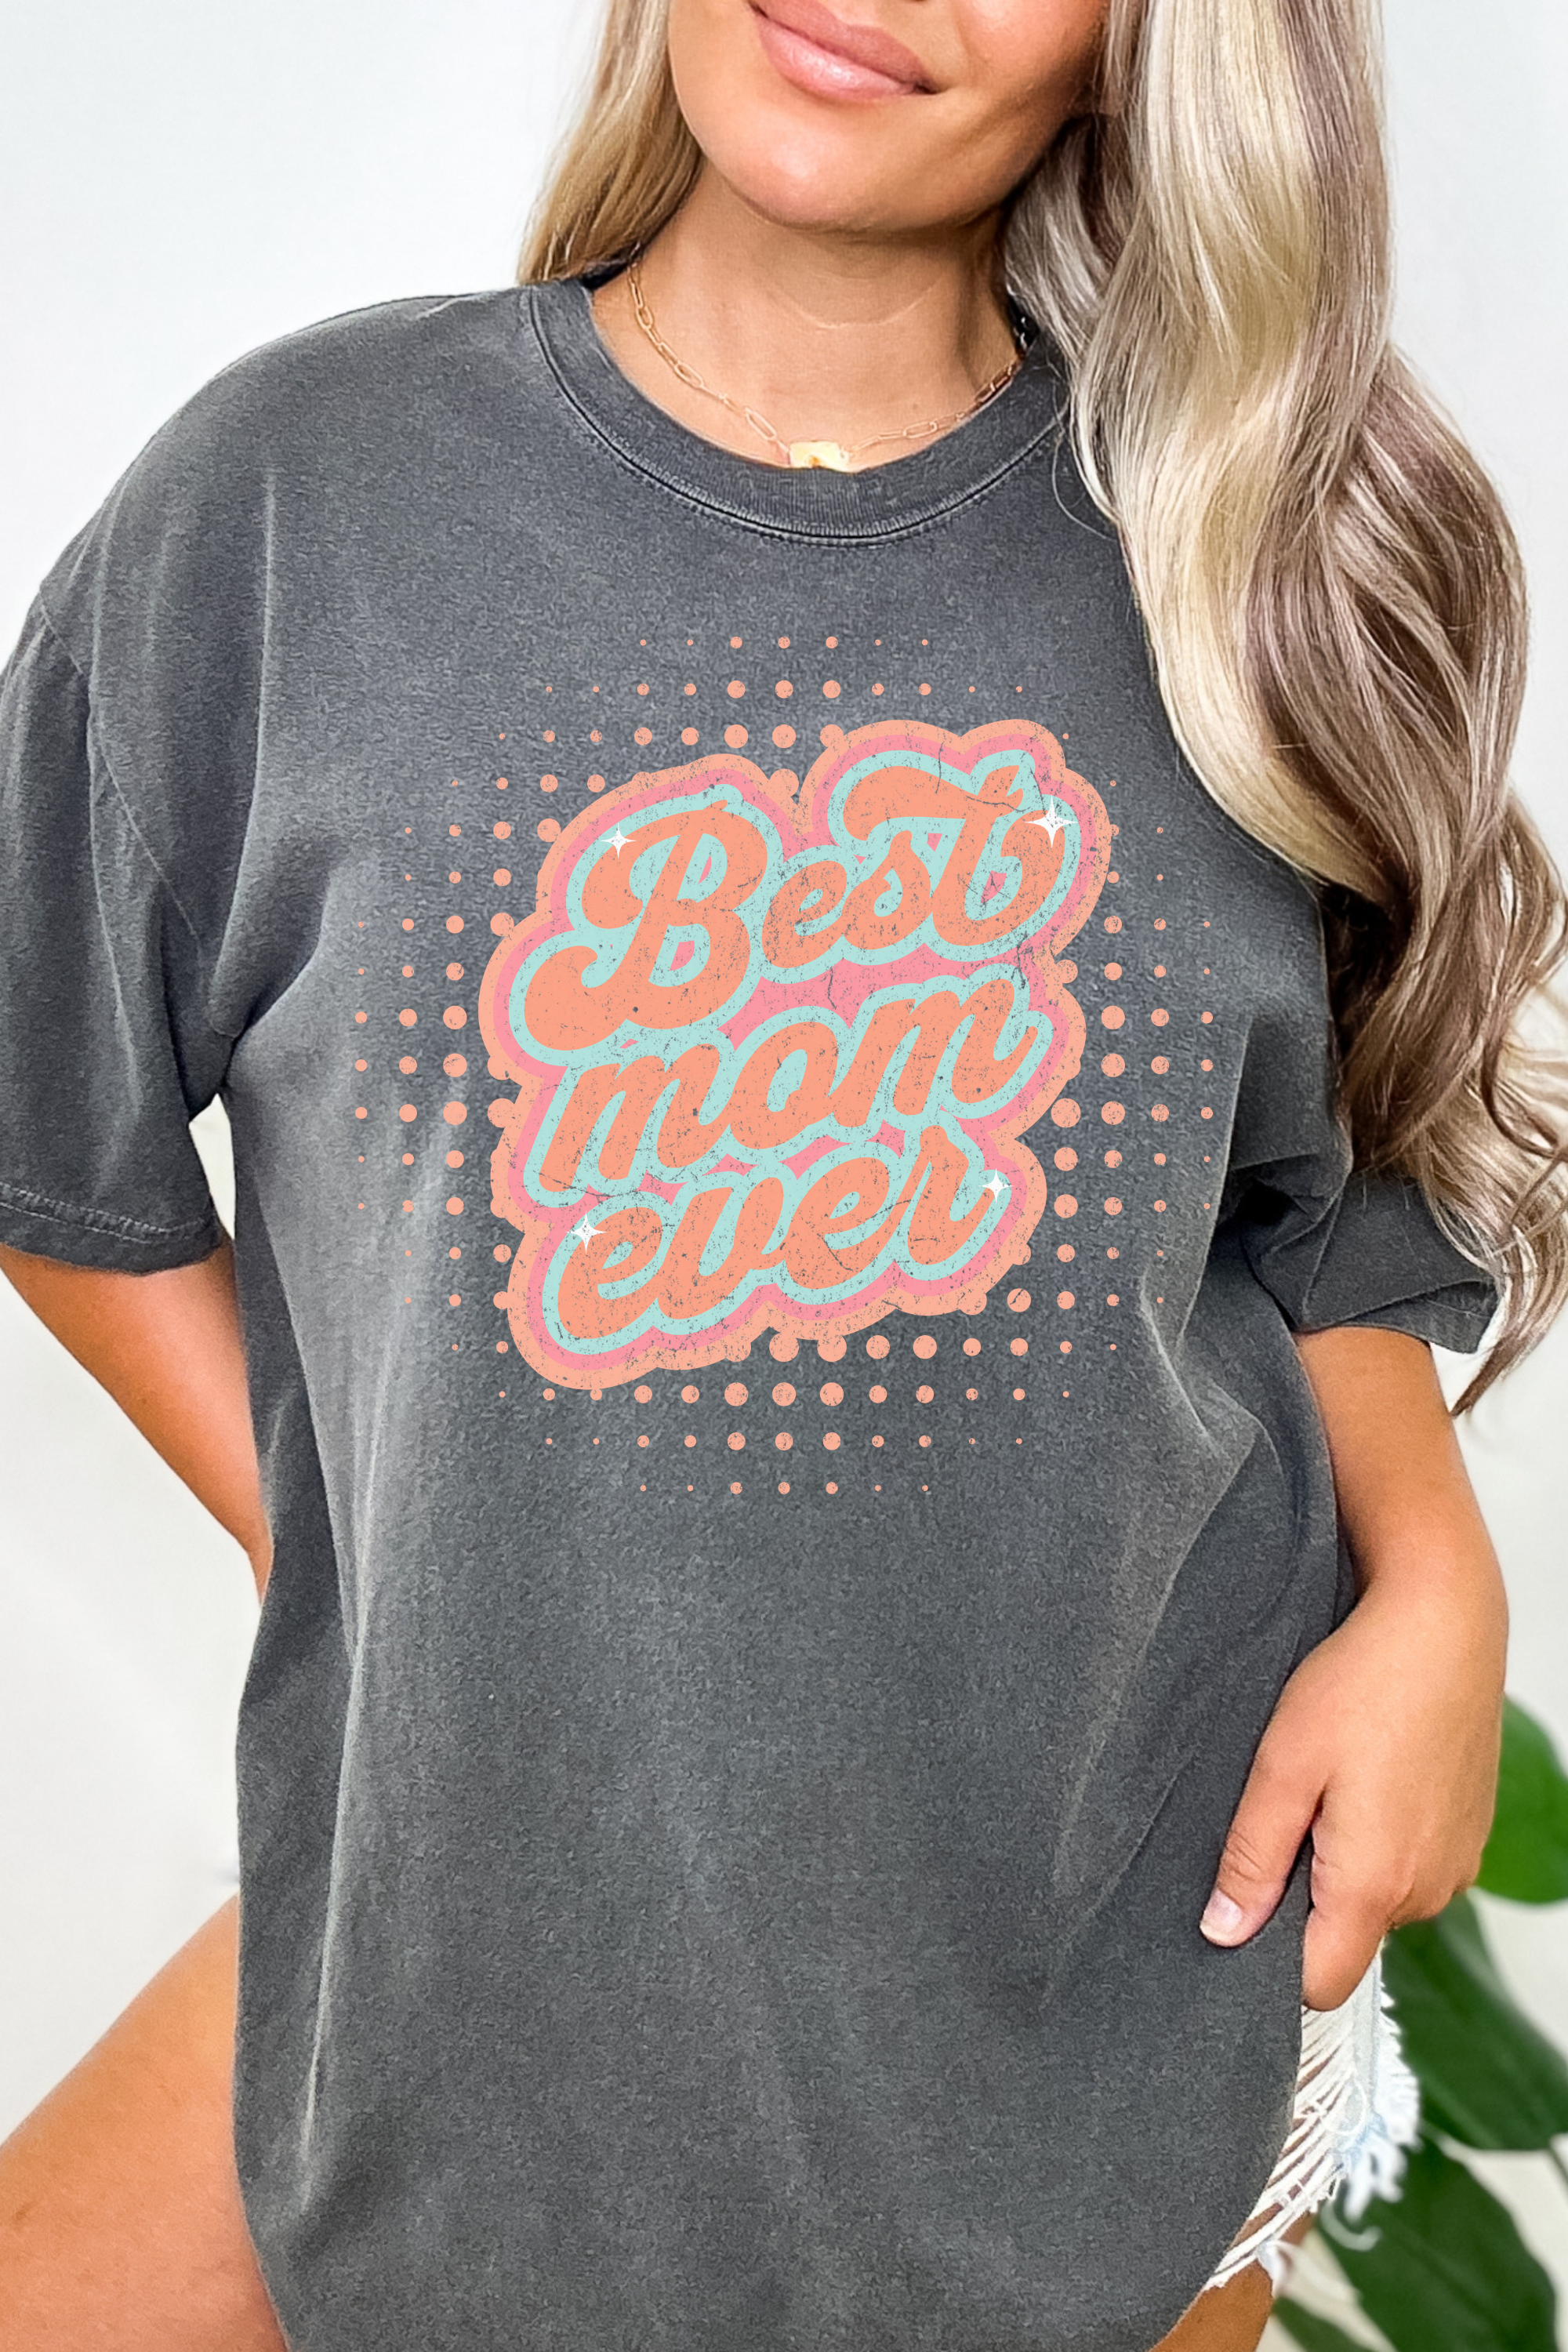 GOLDxTEAL Best Mom graphic t-shirt. Perfect Mother's Day gift that special mom.